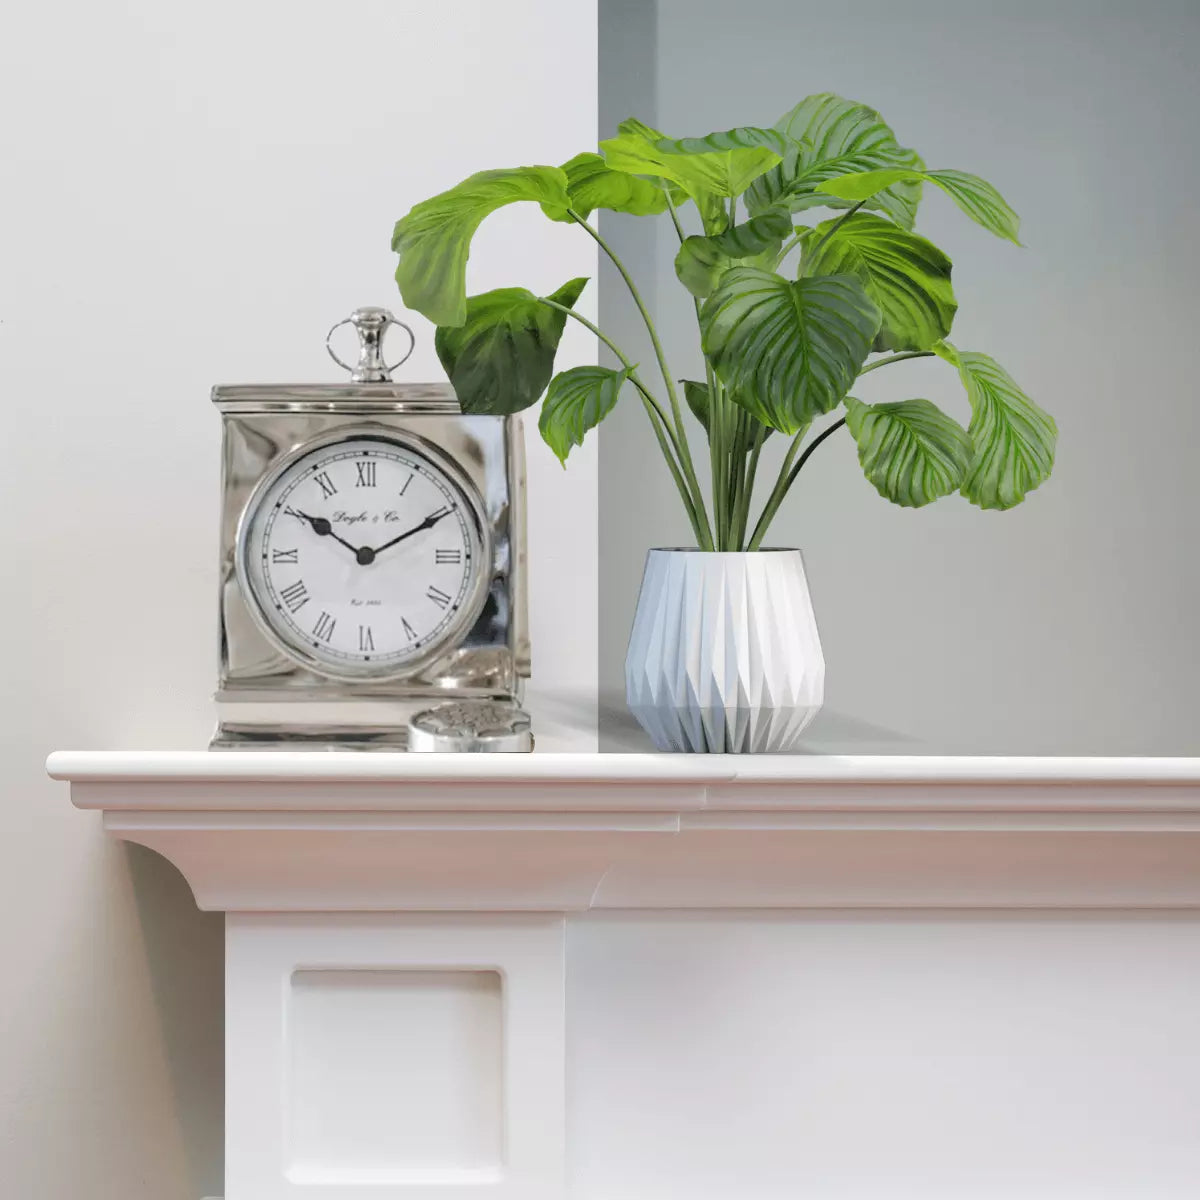 Silver Mantle clock sitting on Mantle piece with plant next to it